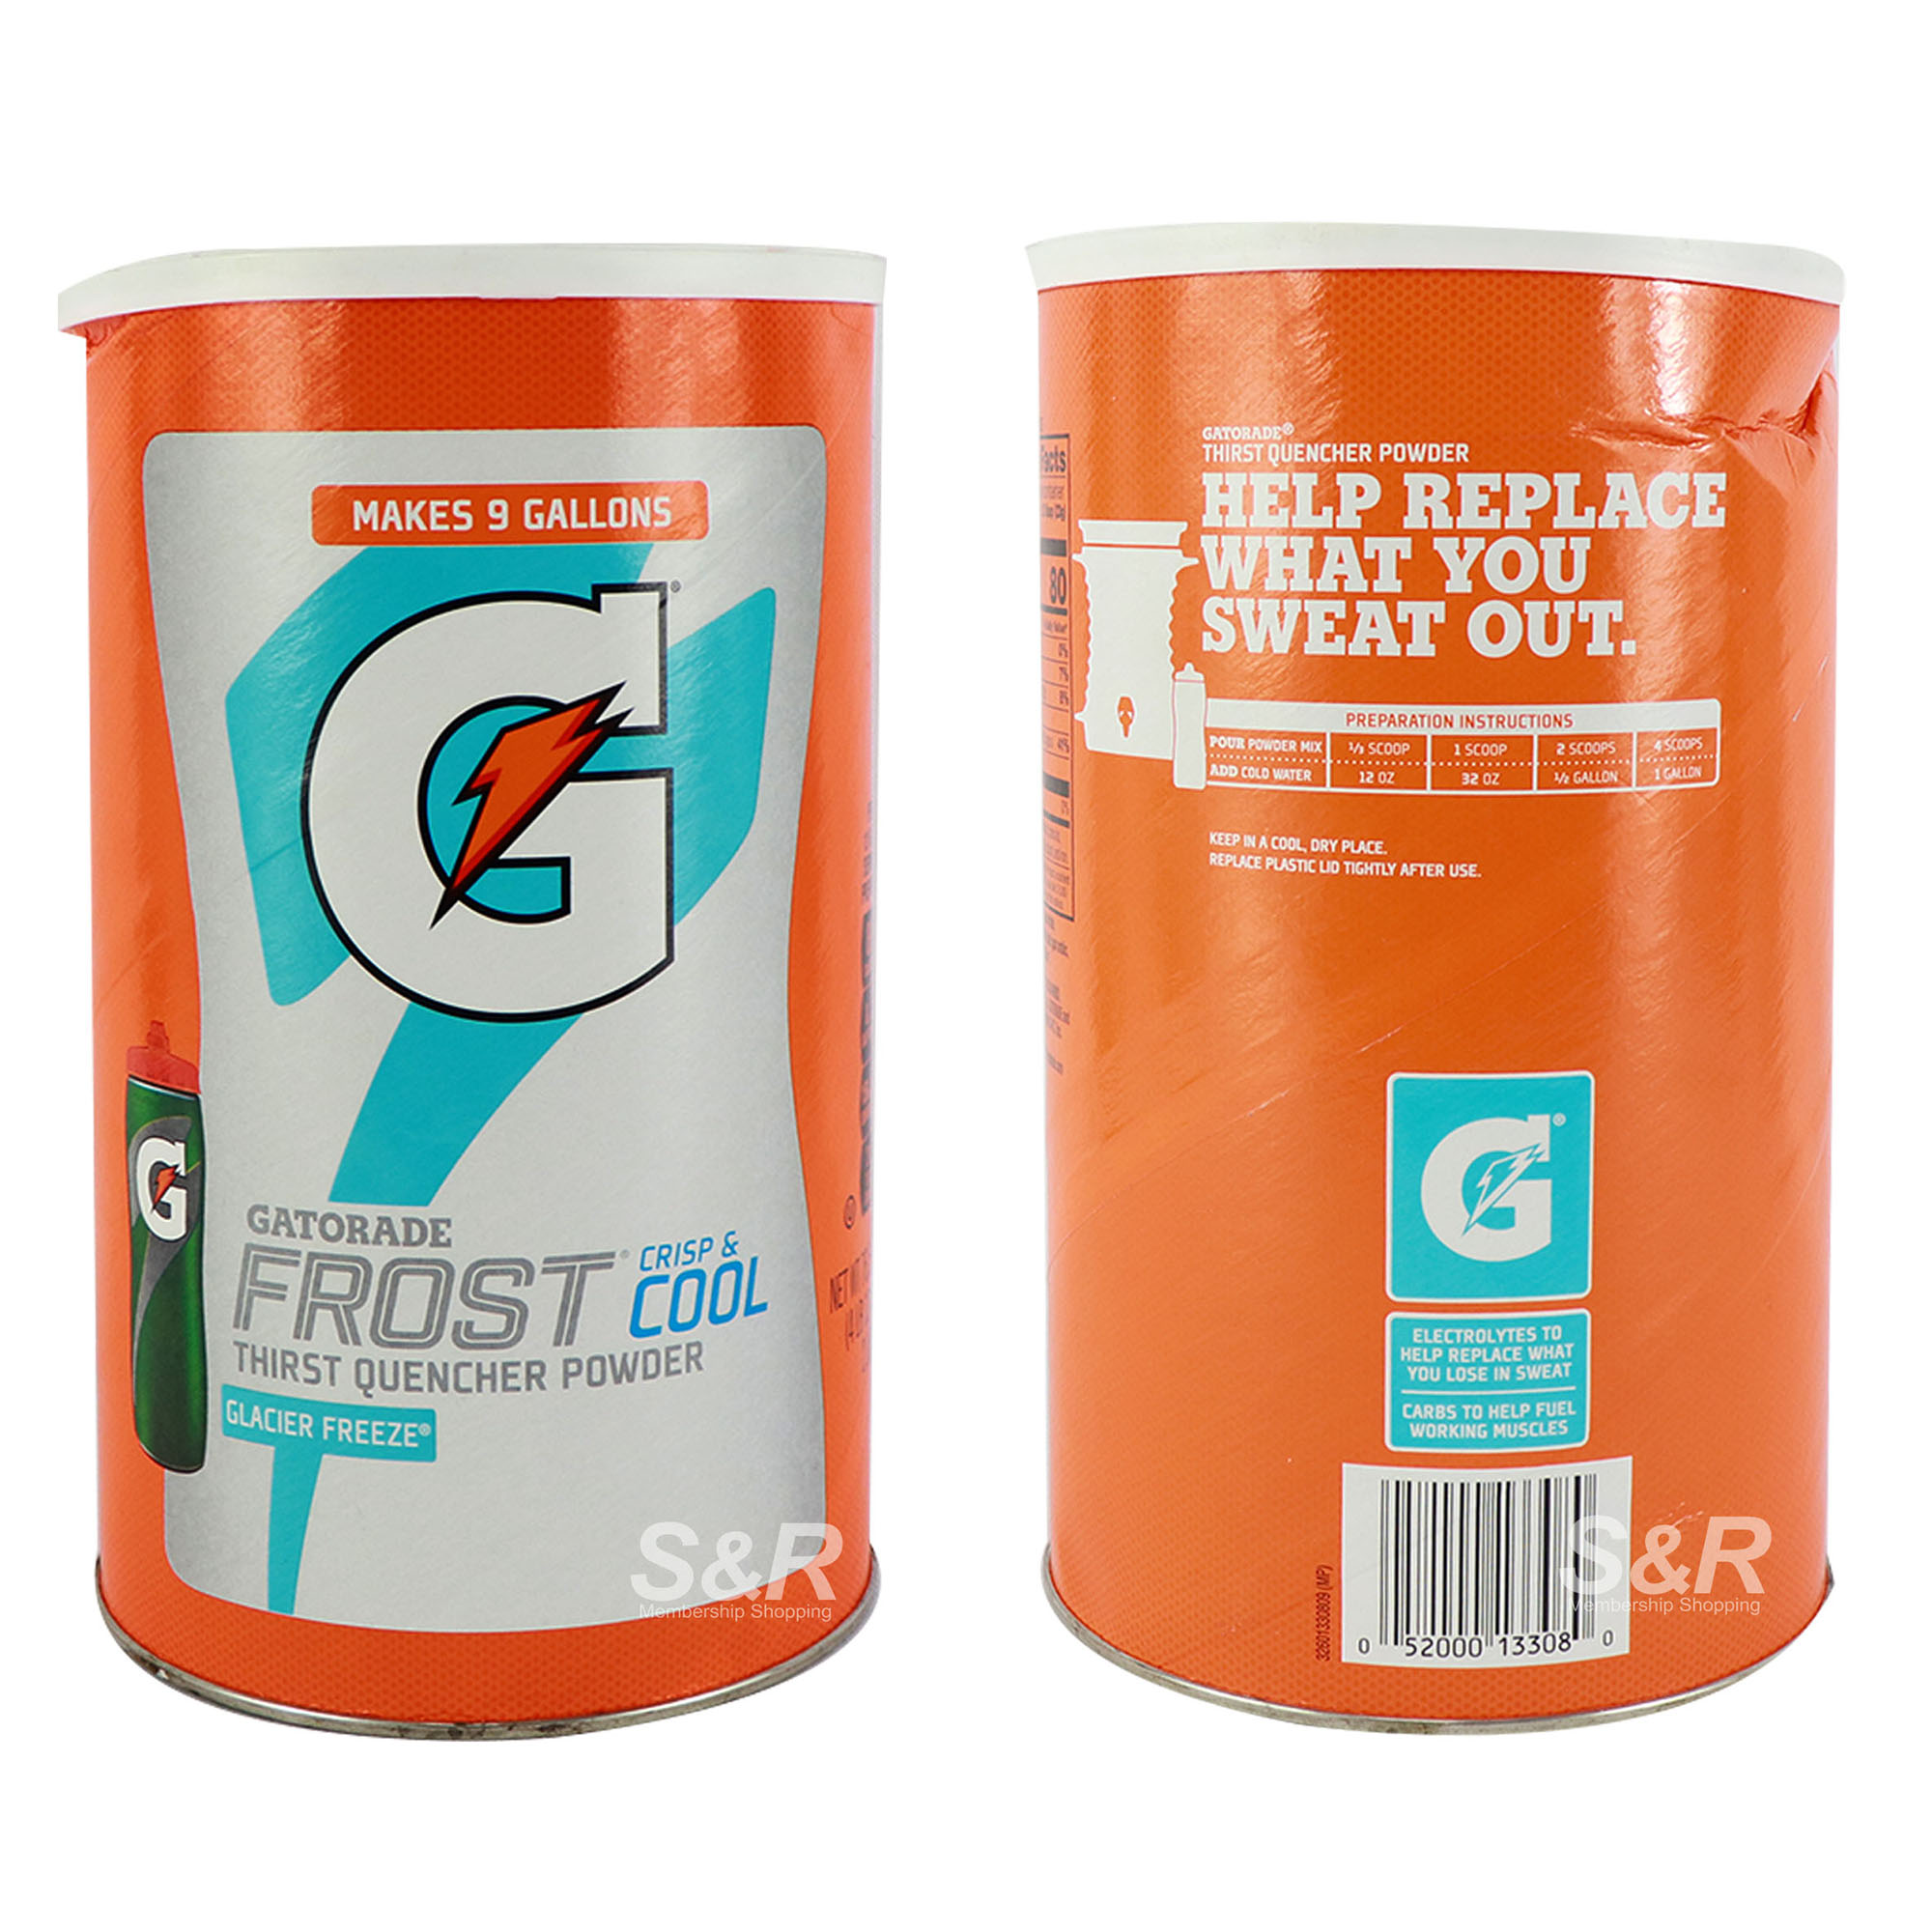 Frost Cool Crisp & Cool Thirst Quencher